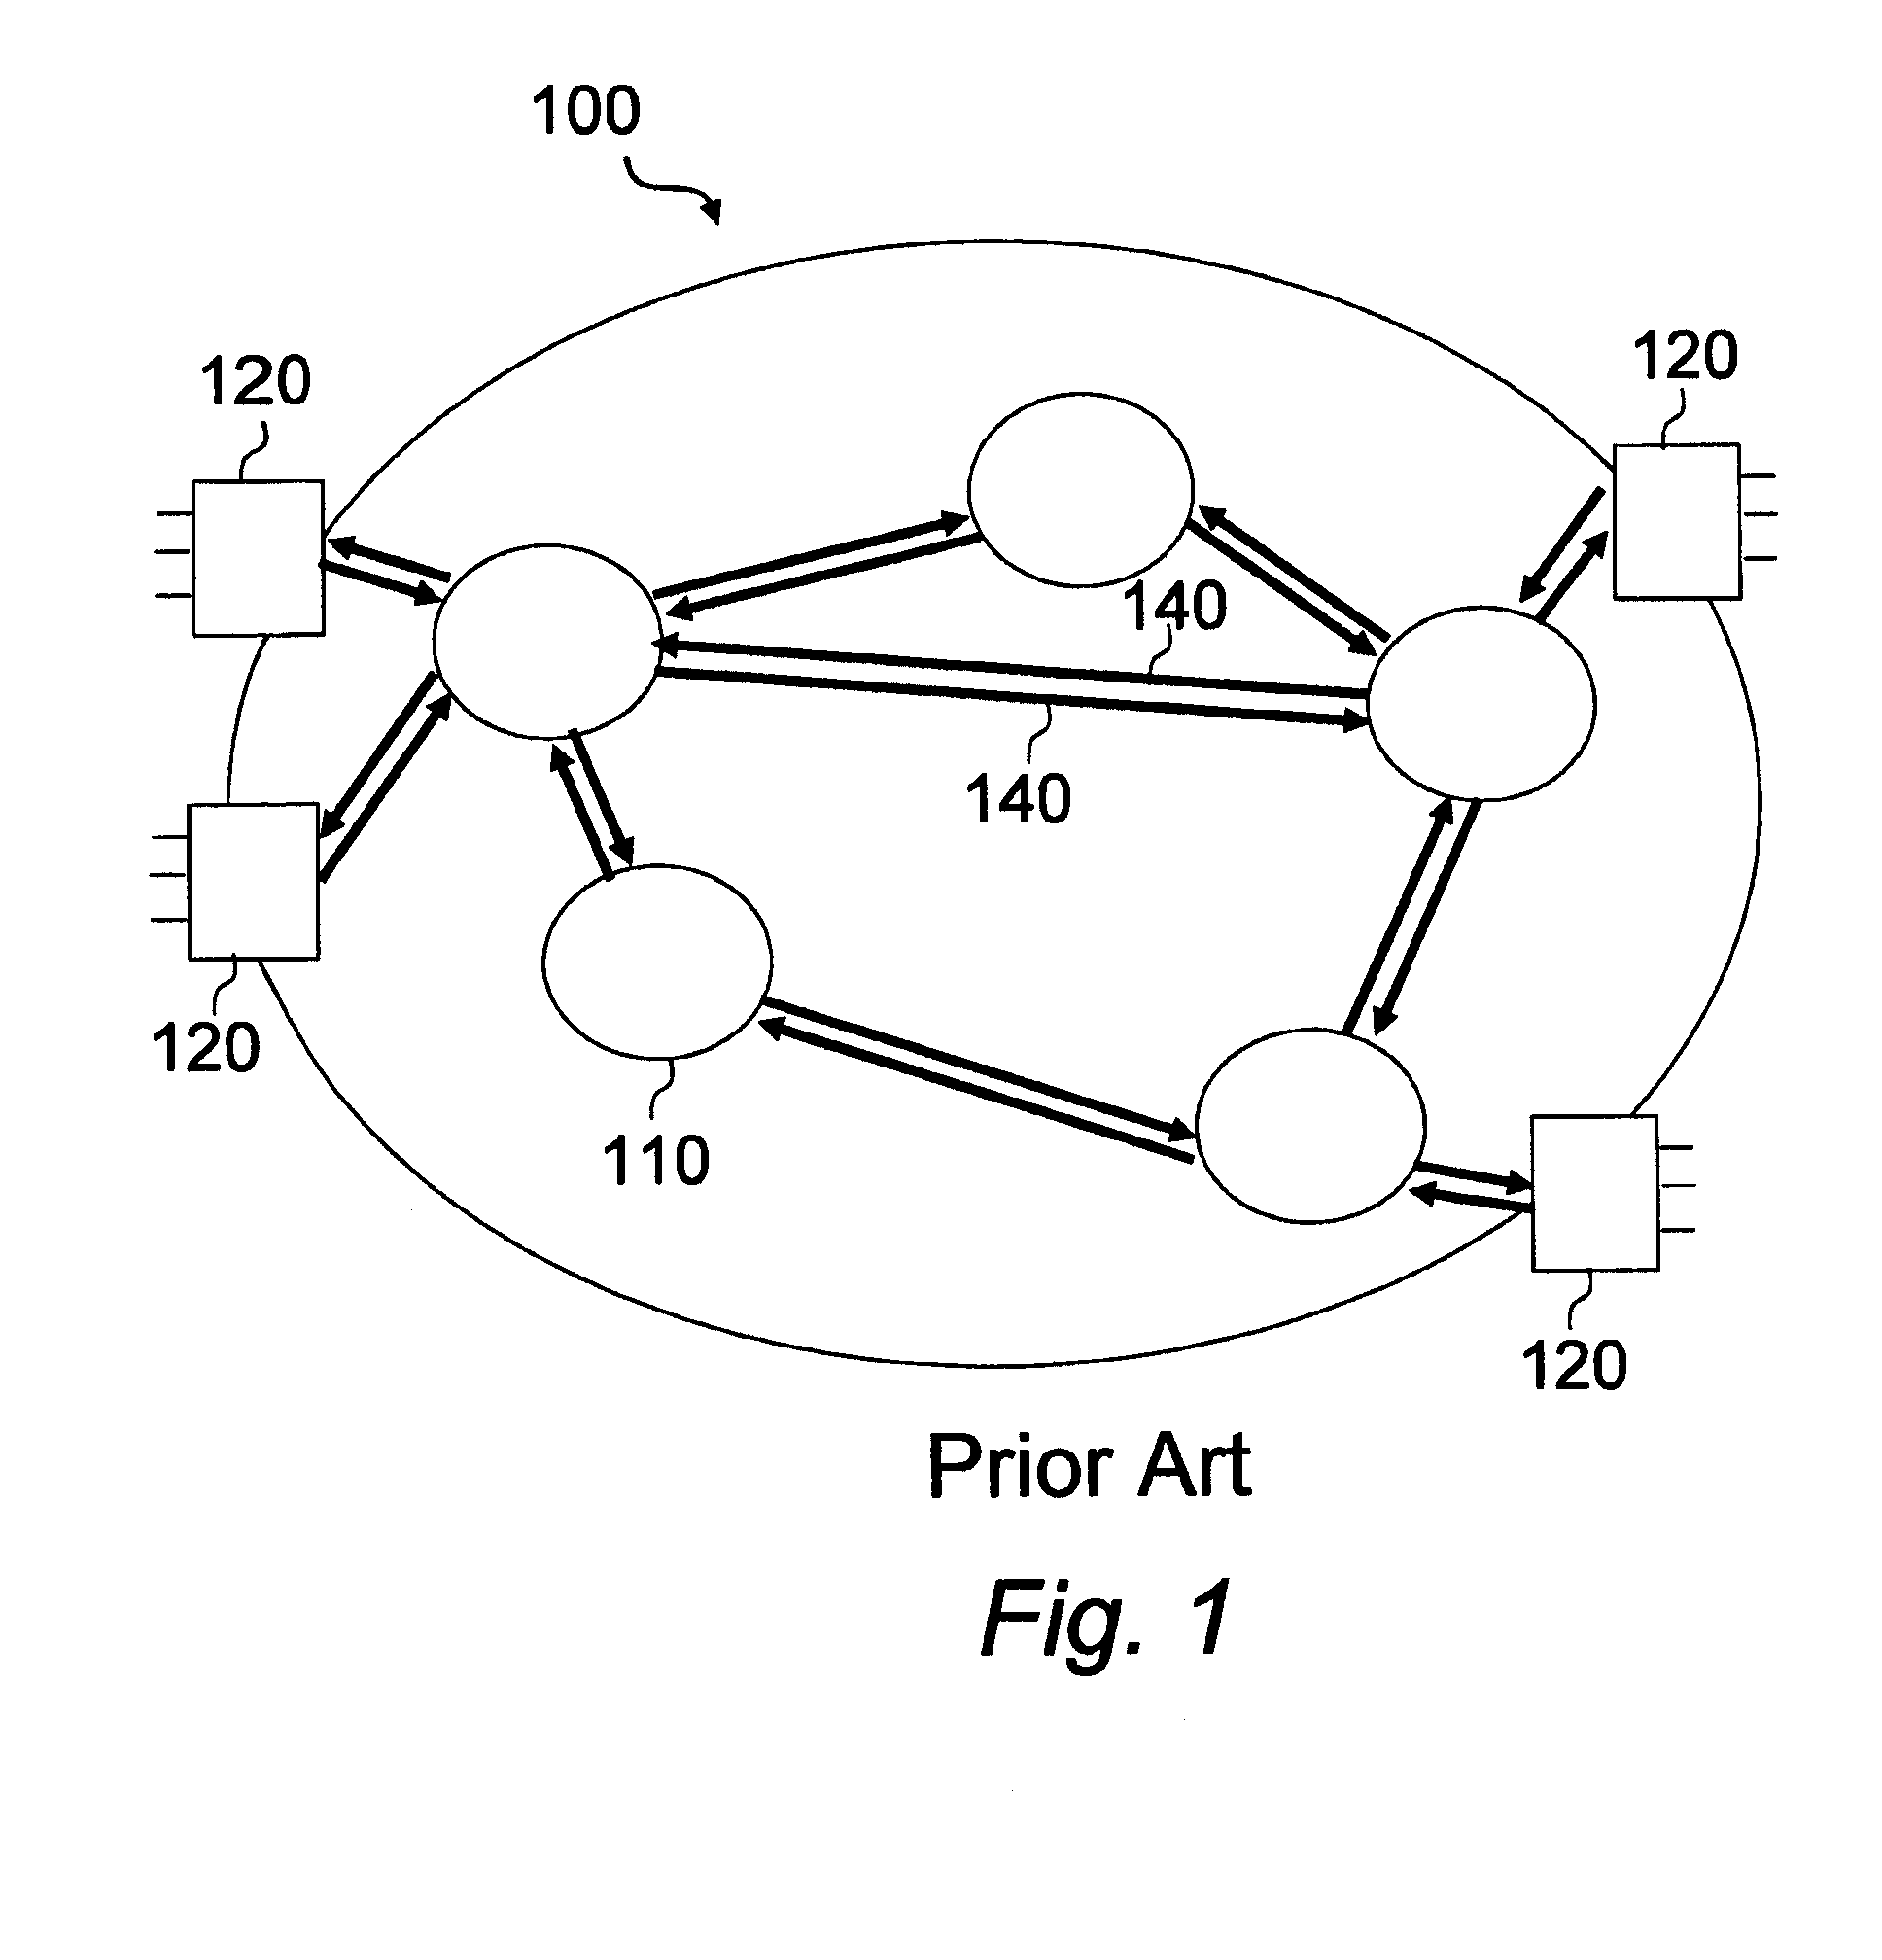 Methods and apparatus for securing optical burst switching (OBS) networks